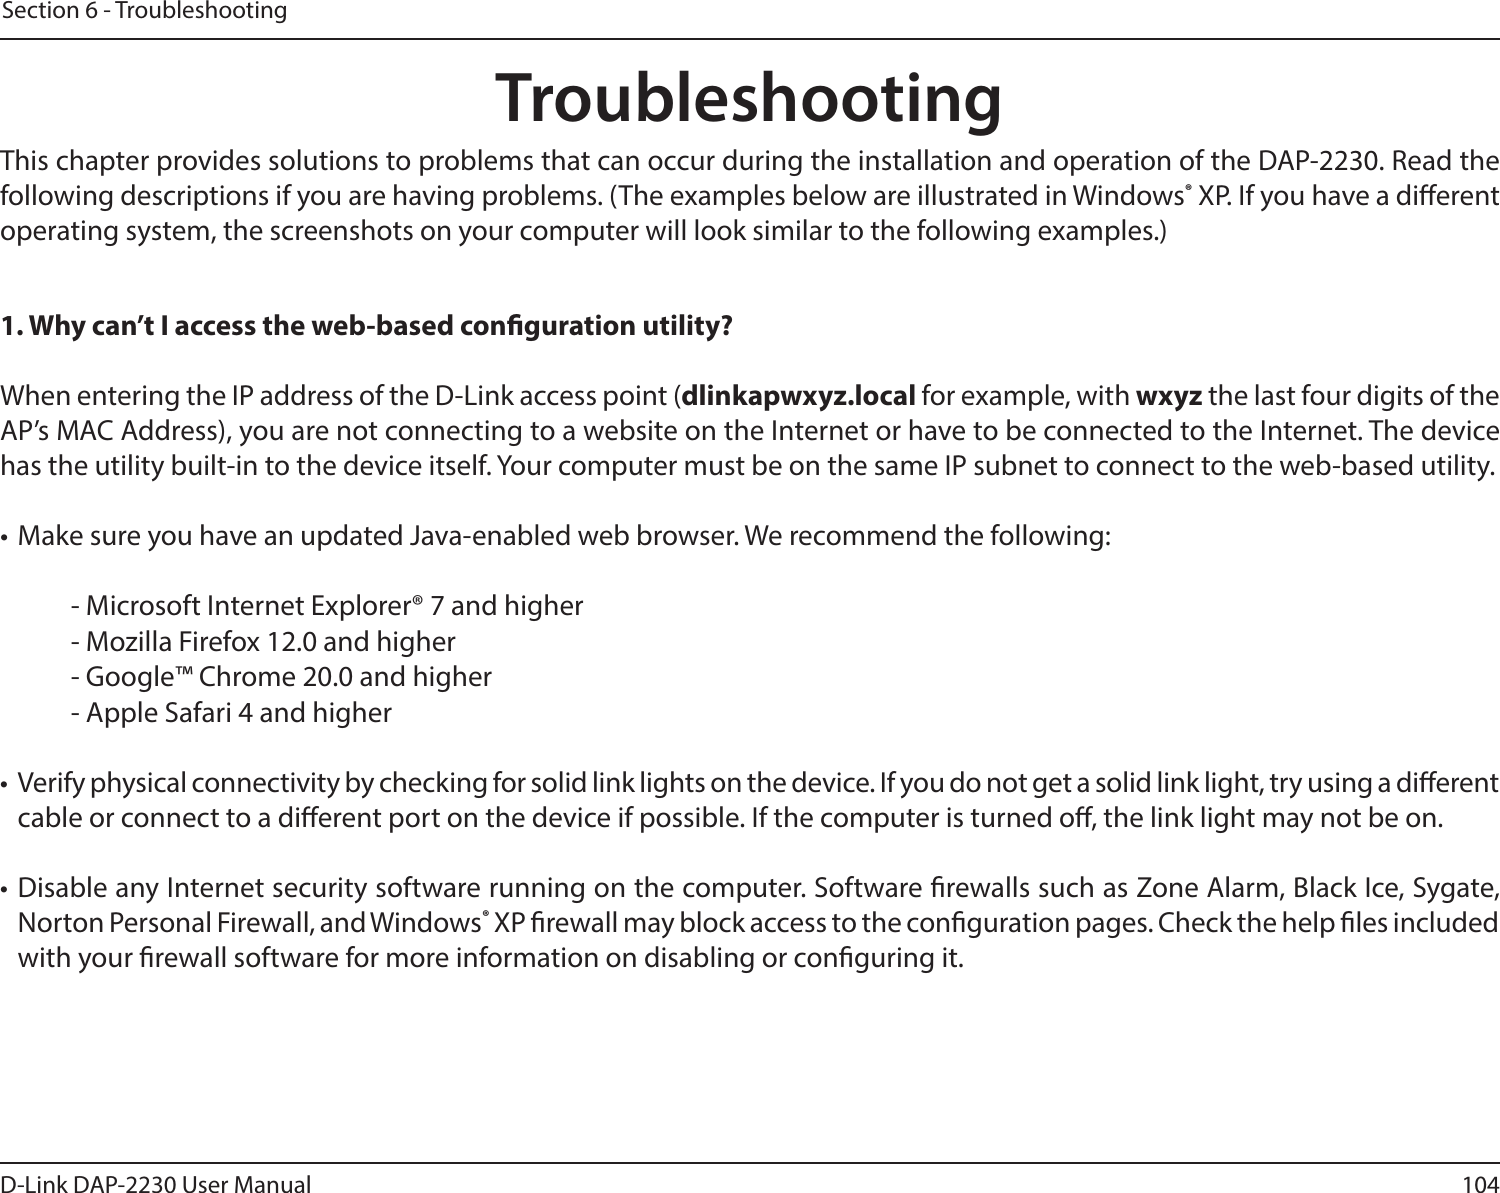 104D-Link DAP-2230 User ManualSection 6 - TroubleshootingTroubleshootingThis chapter provides solutions to problems that can occur during the installation and operation of the DAP-2230. Read the following descriptions if you are having problems. (The examples below are illustrated in Windows® XP. If you have a dierent operating system, the screenshots on your computer will look similar to the following examples.)1. Why can’t I access the web-based conguration utility?When entering the IP address of the D-Link access point (dlinkapwxyz.local for example, with wxyz the last four digits of the AP’s MAC Address), you are not connecting to a website on the Internet or have to be connected to the Internet. The device has the utility built-in to the device itself. Your computer must be on the same IP subnet to connect to the web-based utility. • Make sure you have an updated Java-enabled web browser. We recommend the following: - Microsoft Internet Explorer® 7 and higher- Mozilla Firefox 12.0 and higher- Google™ Chrome 20.0 and higher- Apple Safari 4 and higher•  Verify physical connectivity by checking for solid link lights on the device. If you do not get a solid link light, try using a dierent cable or connect to a dierent port on the device if possible. If the computer is turned o, the link light may not be on.• Disable any Internet security software running on the computer. Software rewalls such as Zone Alarm, Black Ice, Sygate, Norton Personal Firewall, and Windows® XP rewall may block access to the conguration pages. Check the help les included with your rewall software for more information on disabling or conguring it.